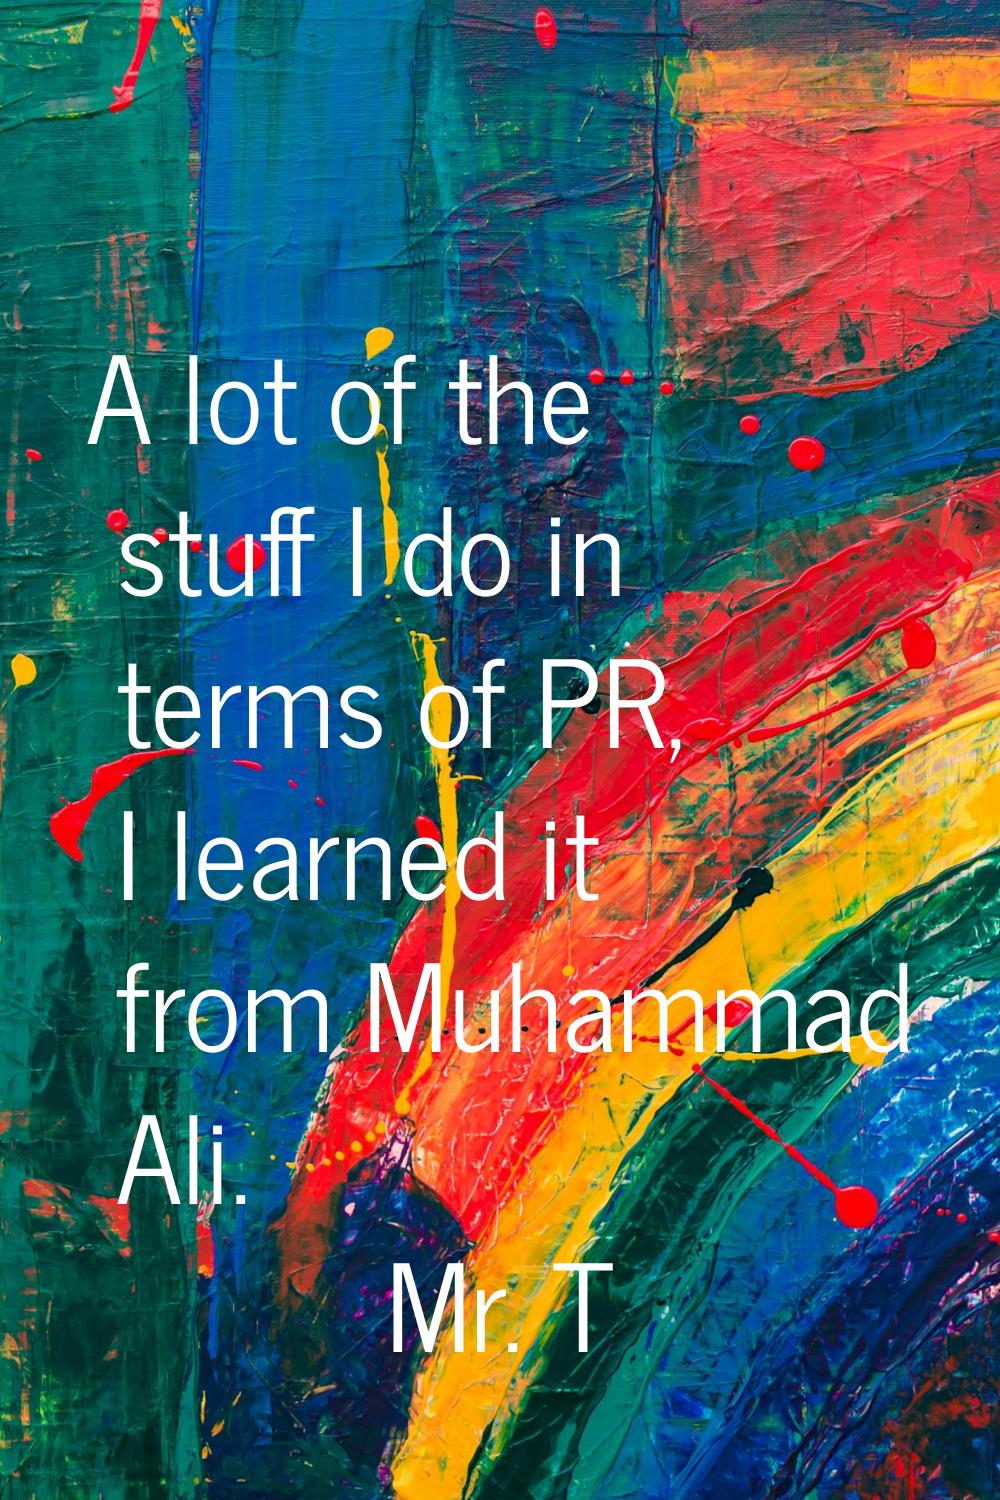 A lot of the stuff I do in terms of PR, I learned it from Muhammad Ali.